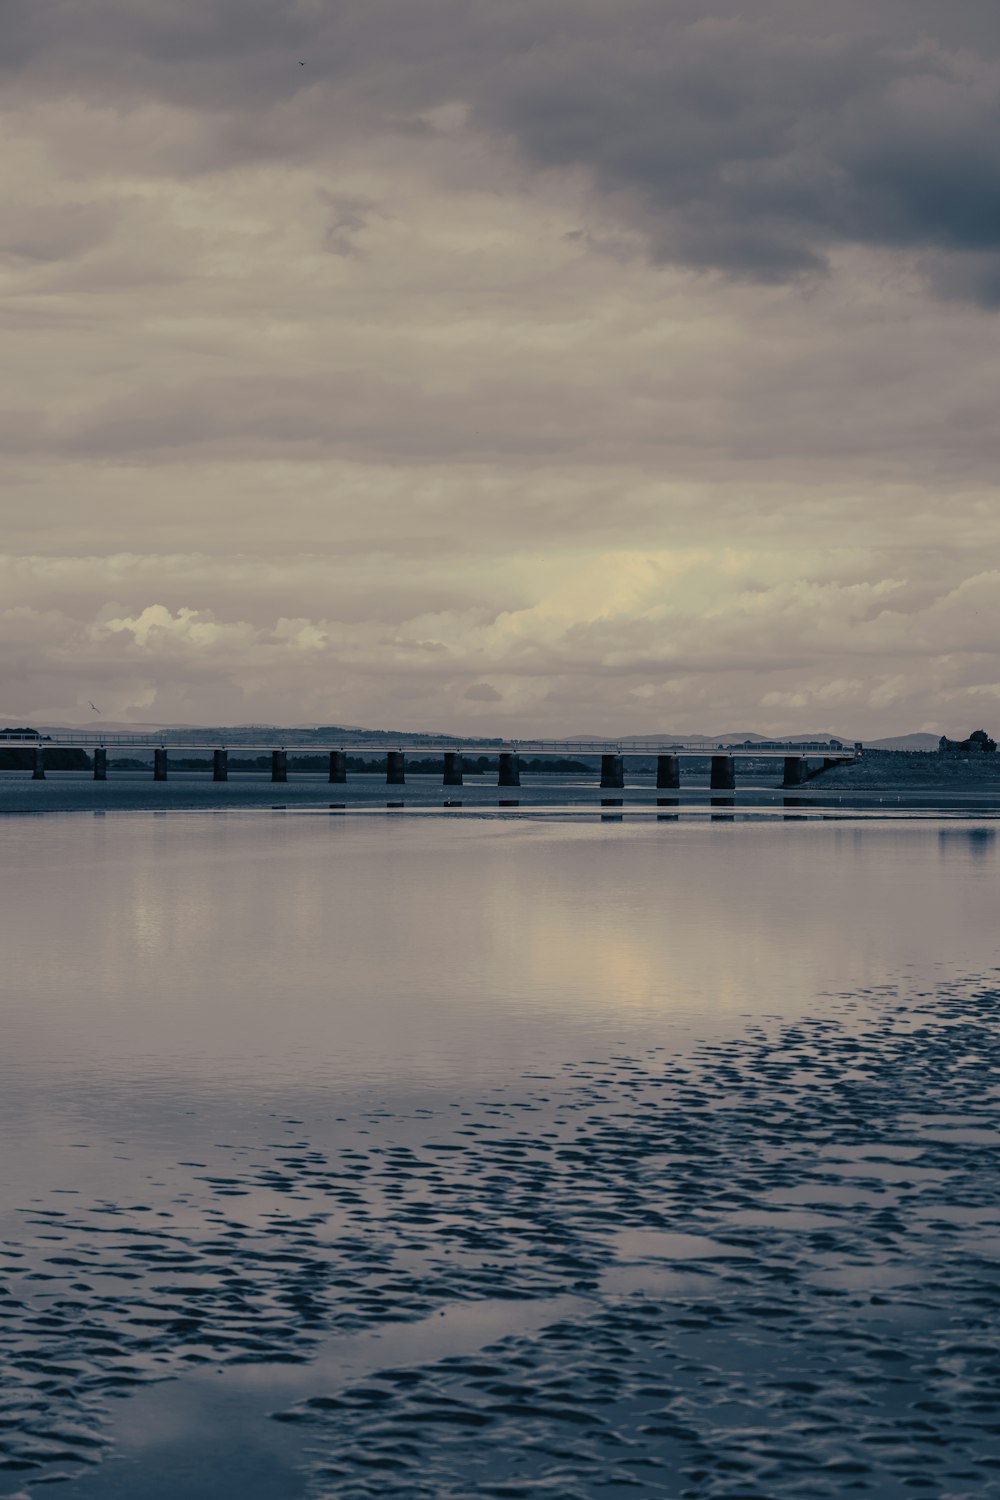 body of water near bridge under cloudy sky during daytime